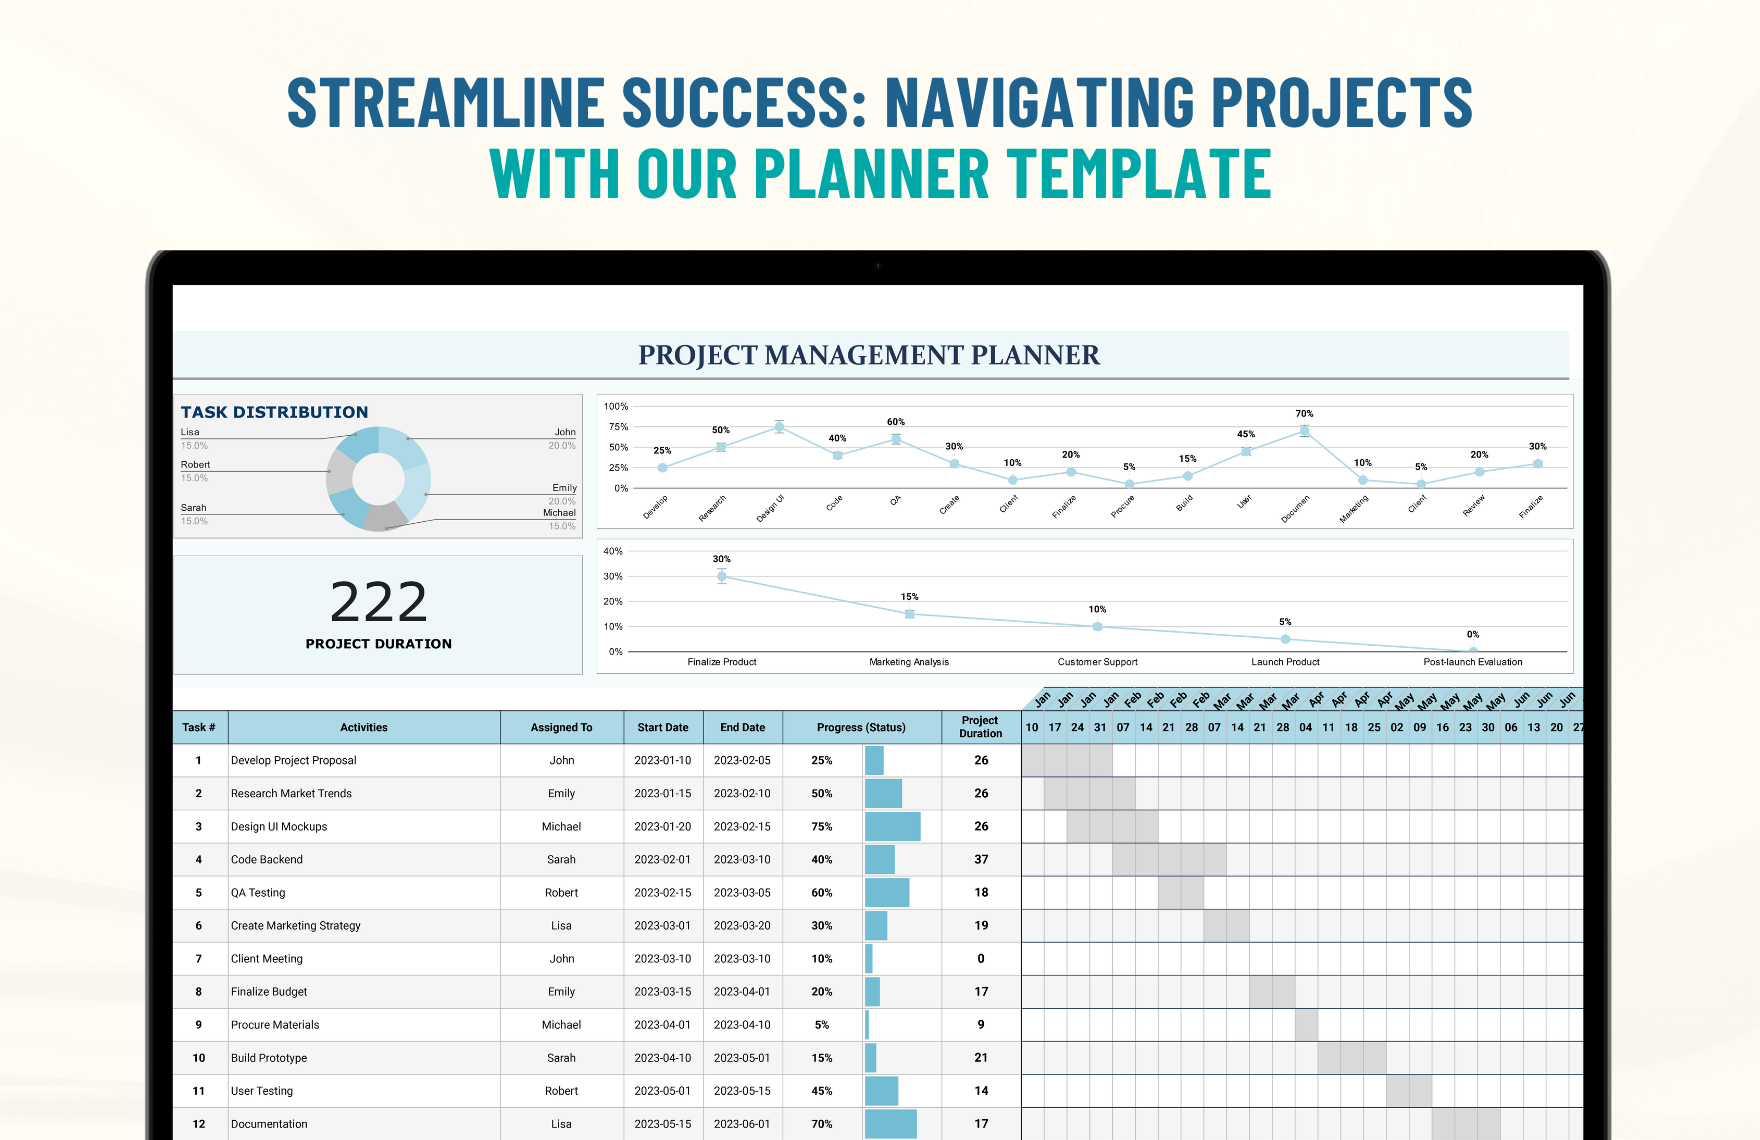 Project Management Planner Template